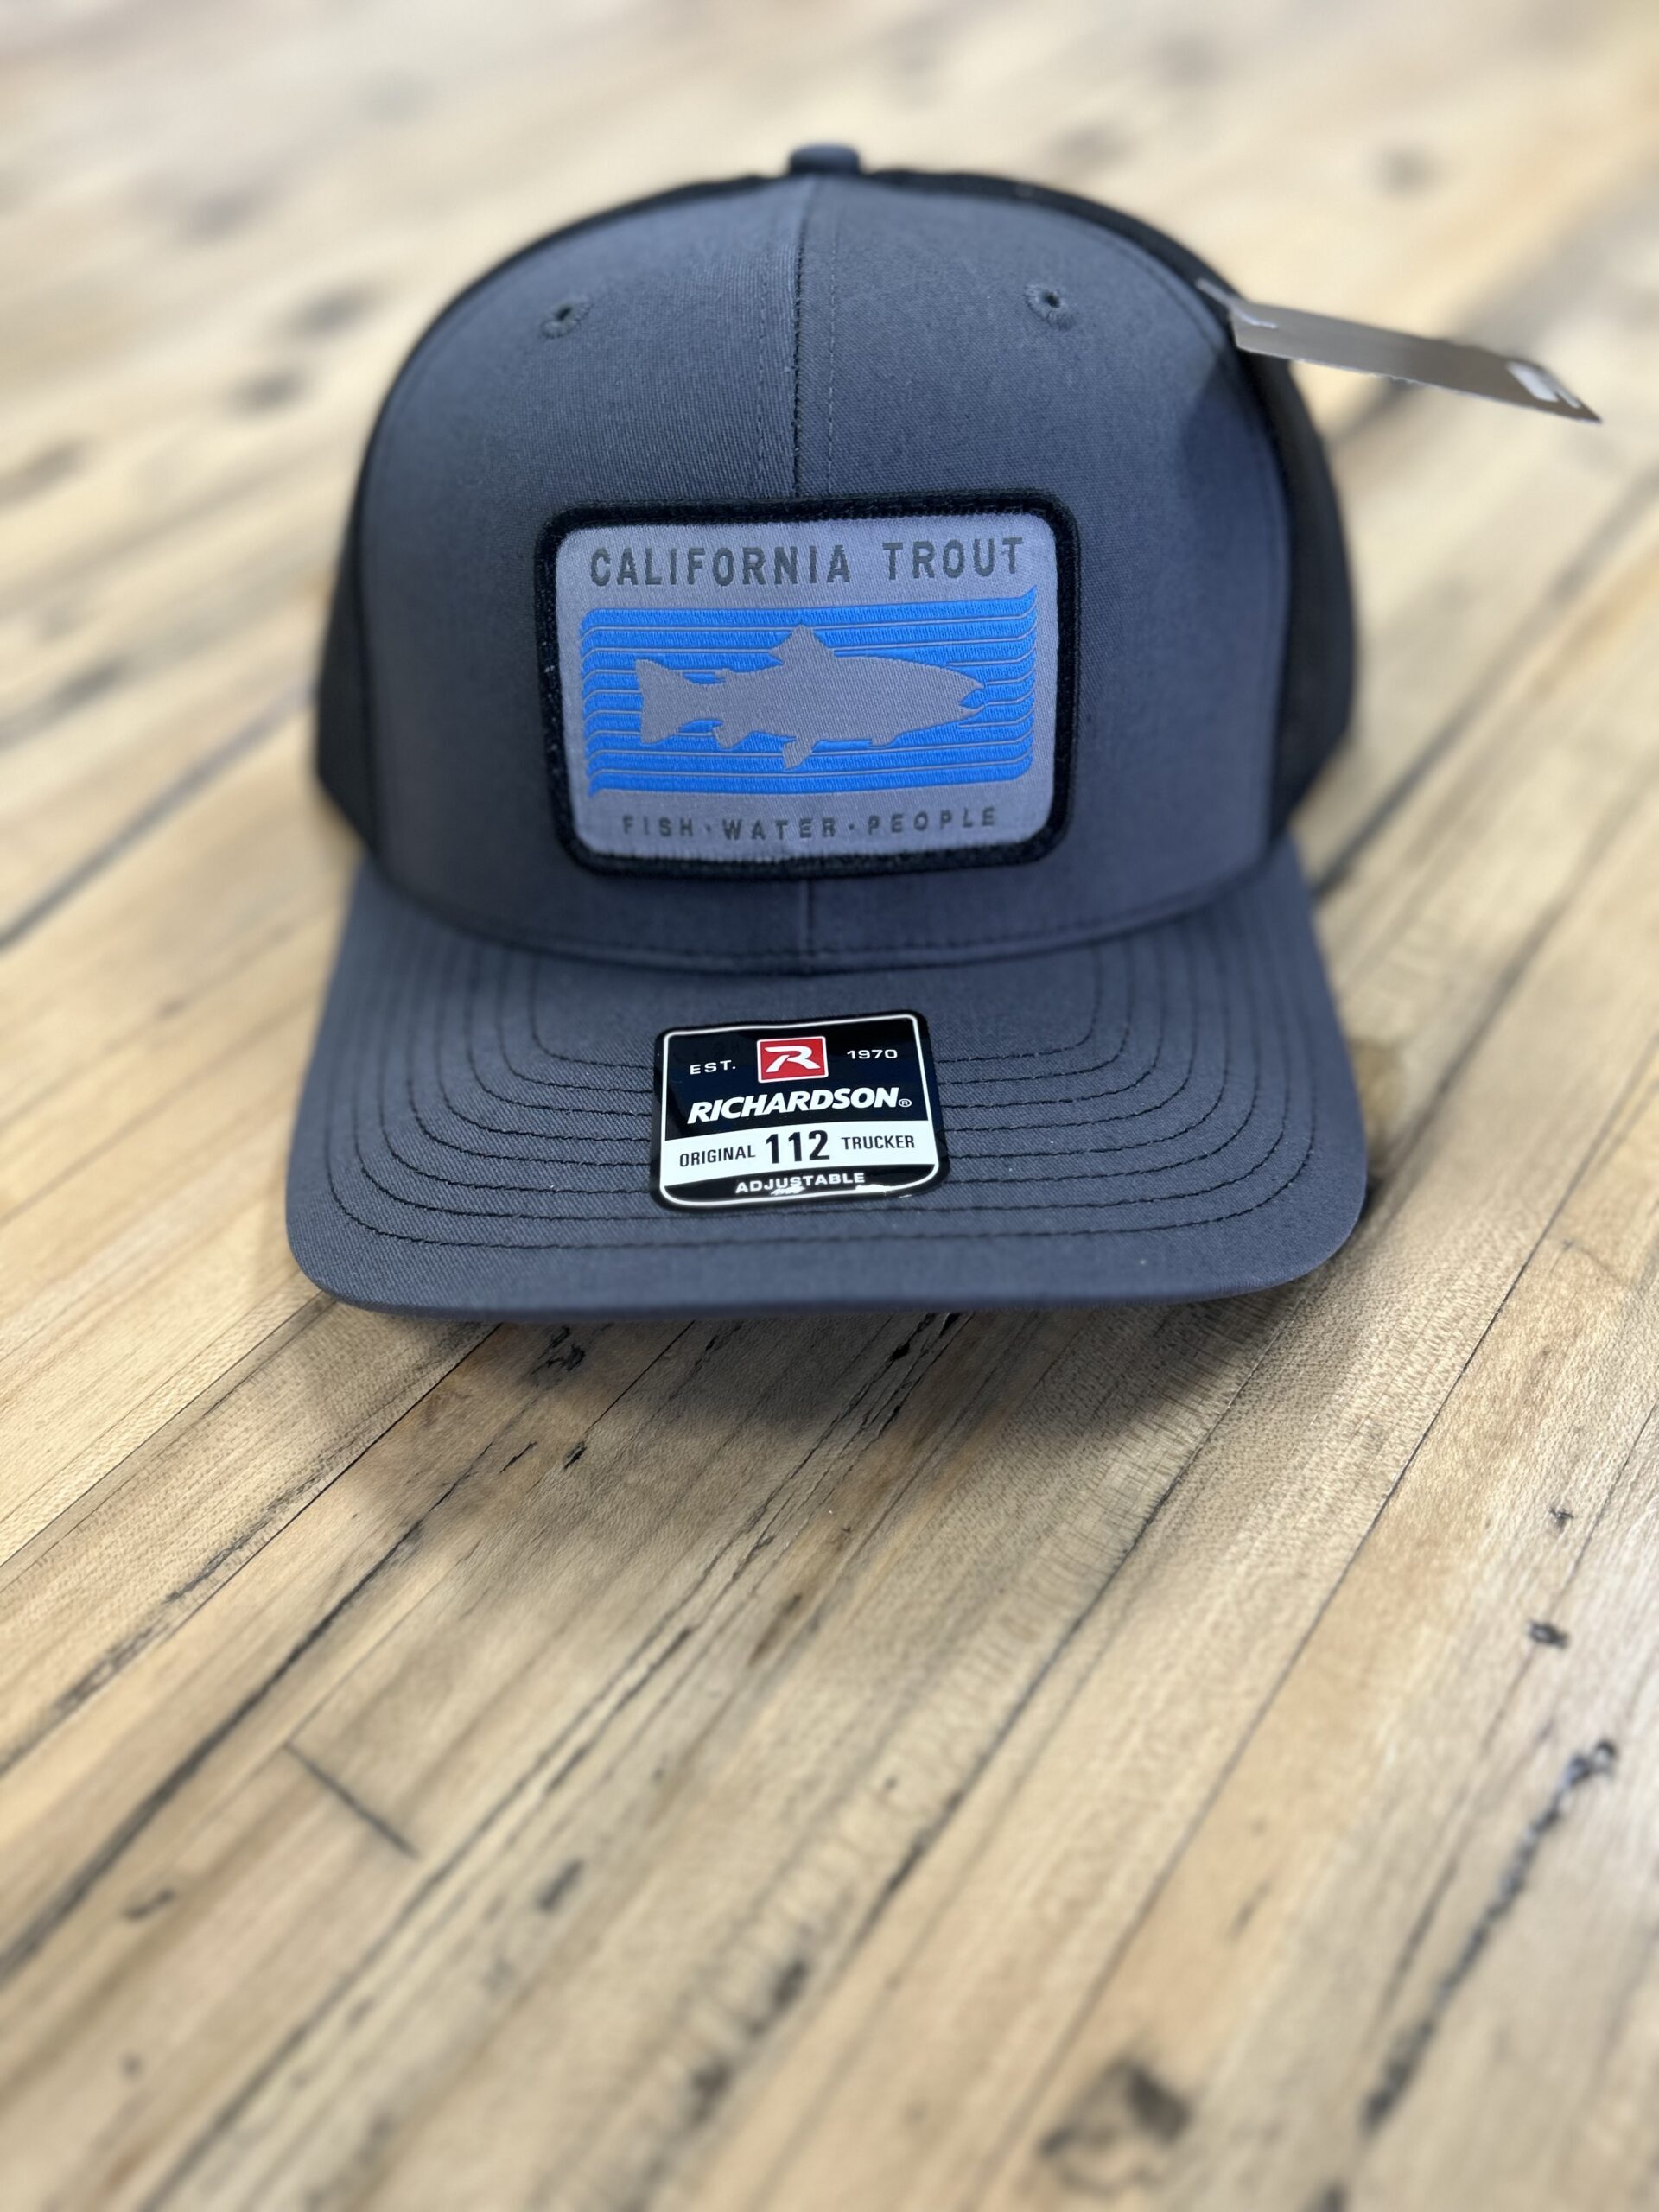 CalTrout Trucker Hat – Charcoal/Black with Woven Patch